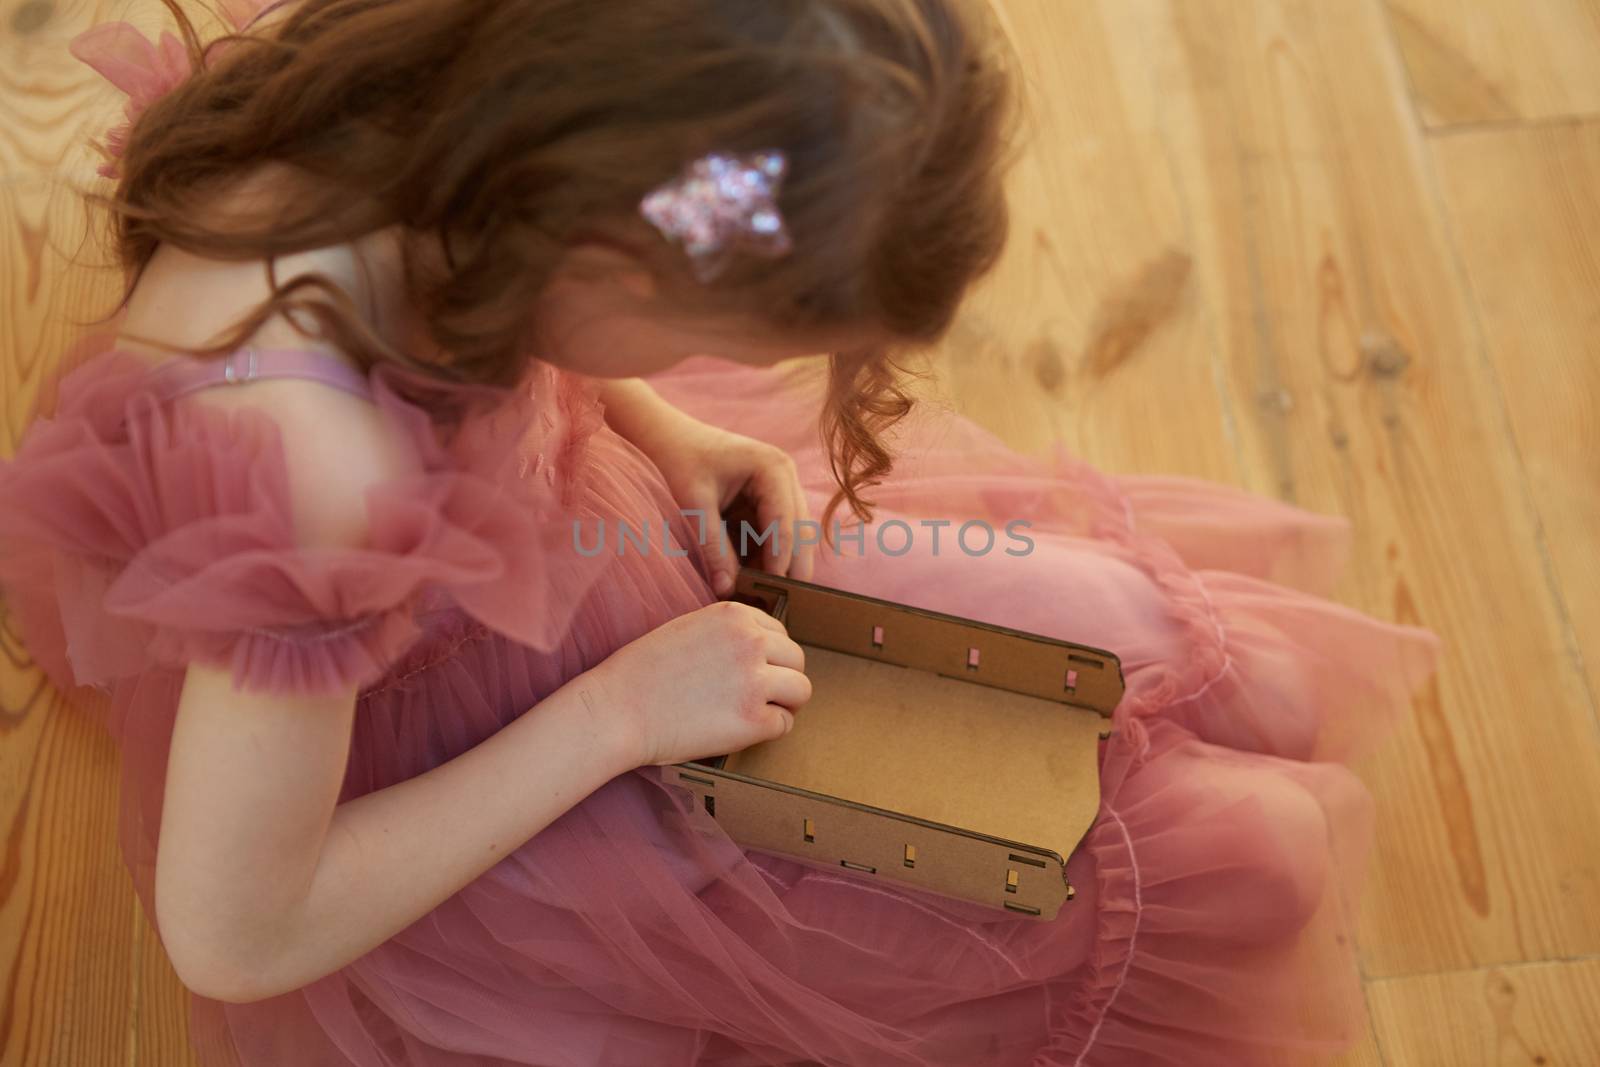 A little girl playing with Cardboard Toy Dollhouse Furniture